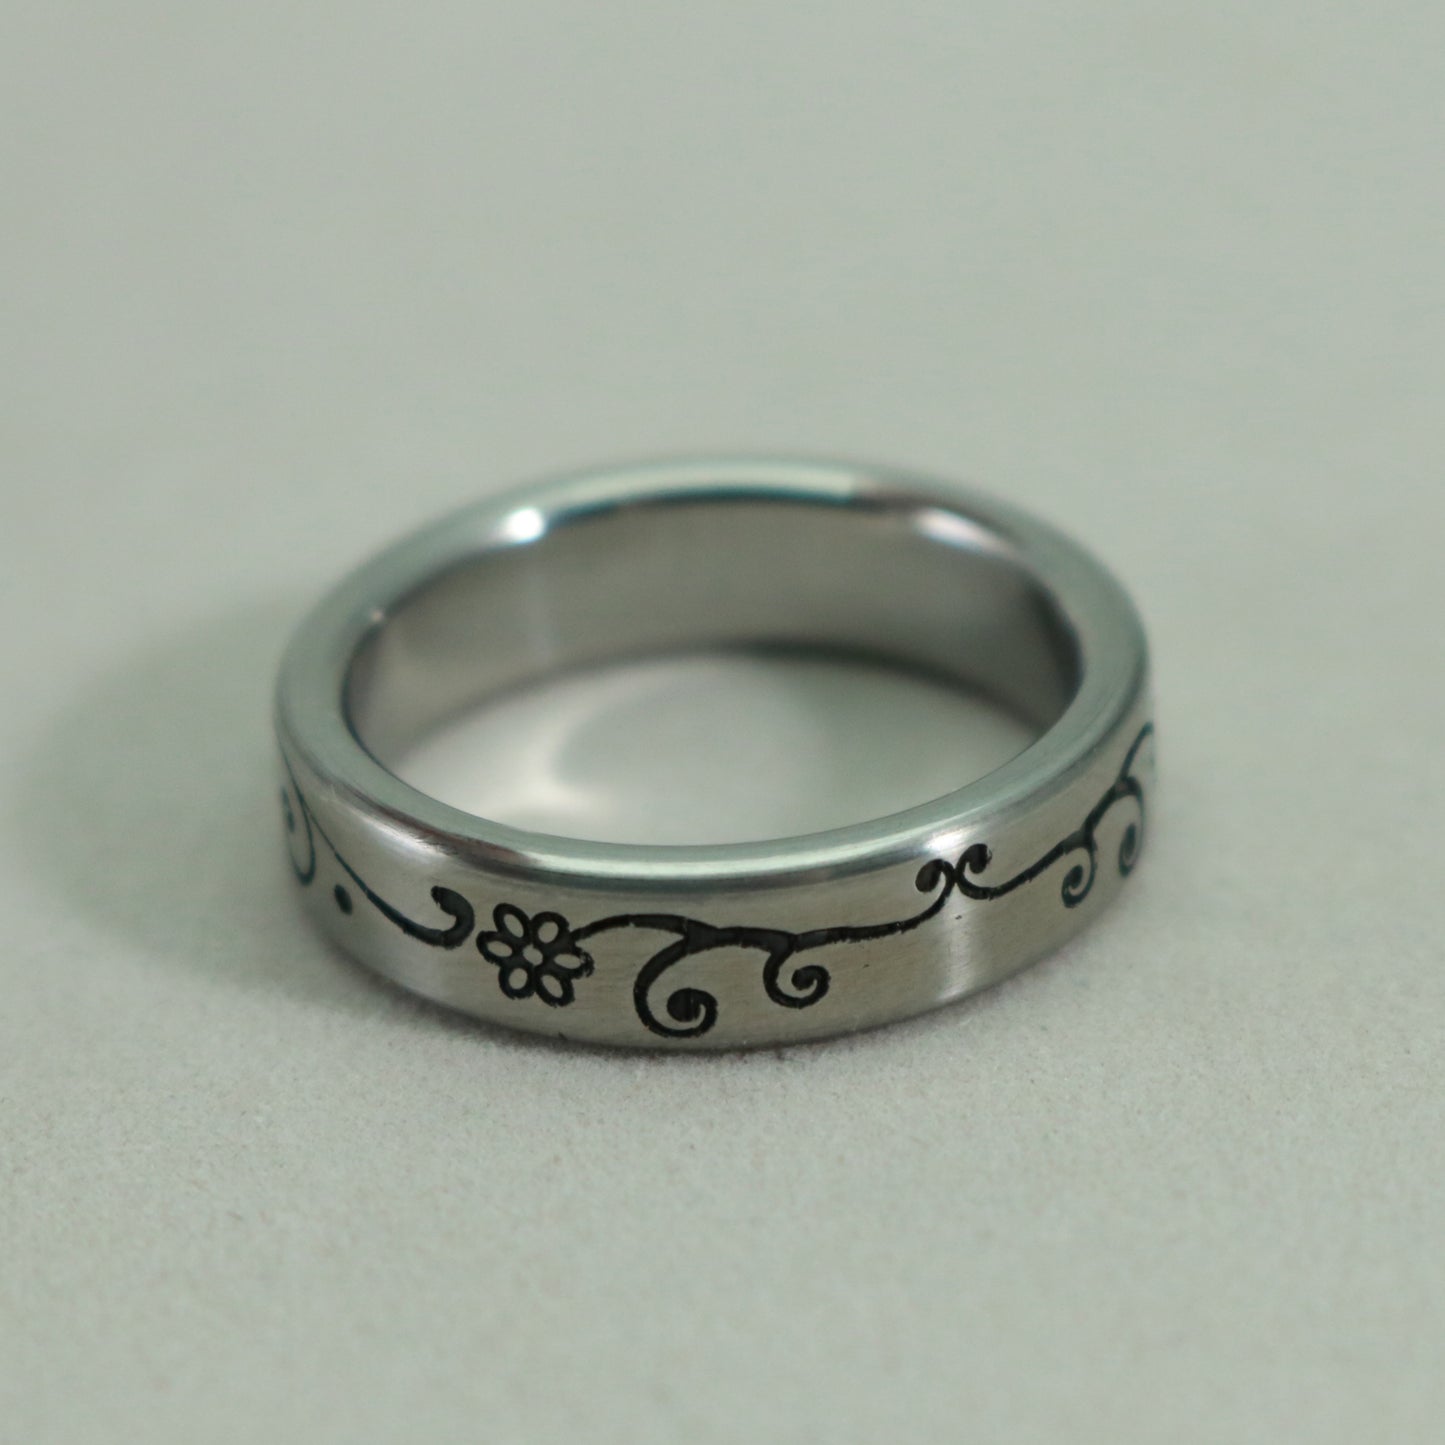 Floral engraved pattern on a size 7 1/4 stainless steel ring